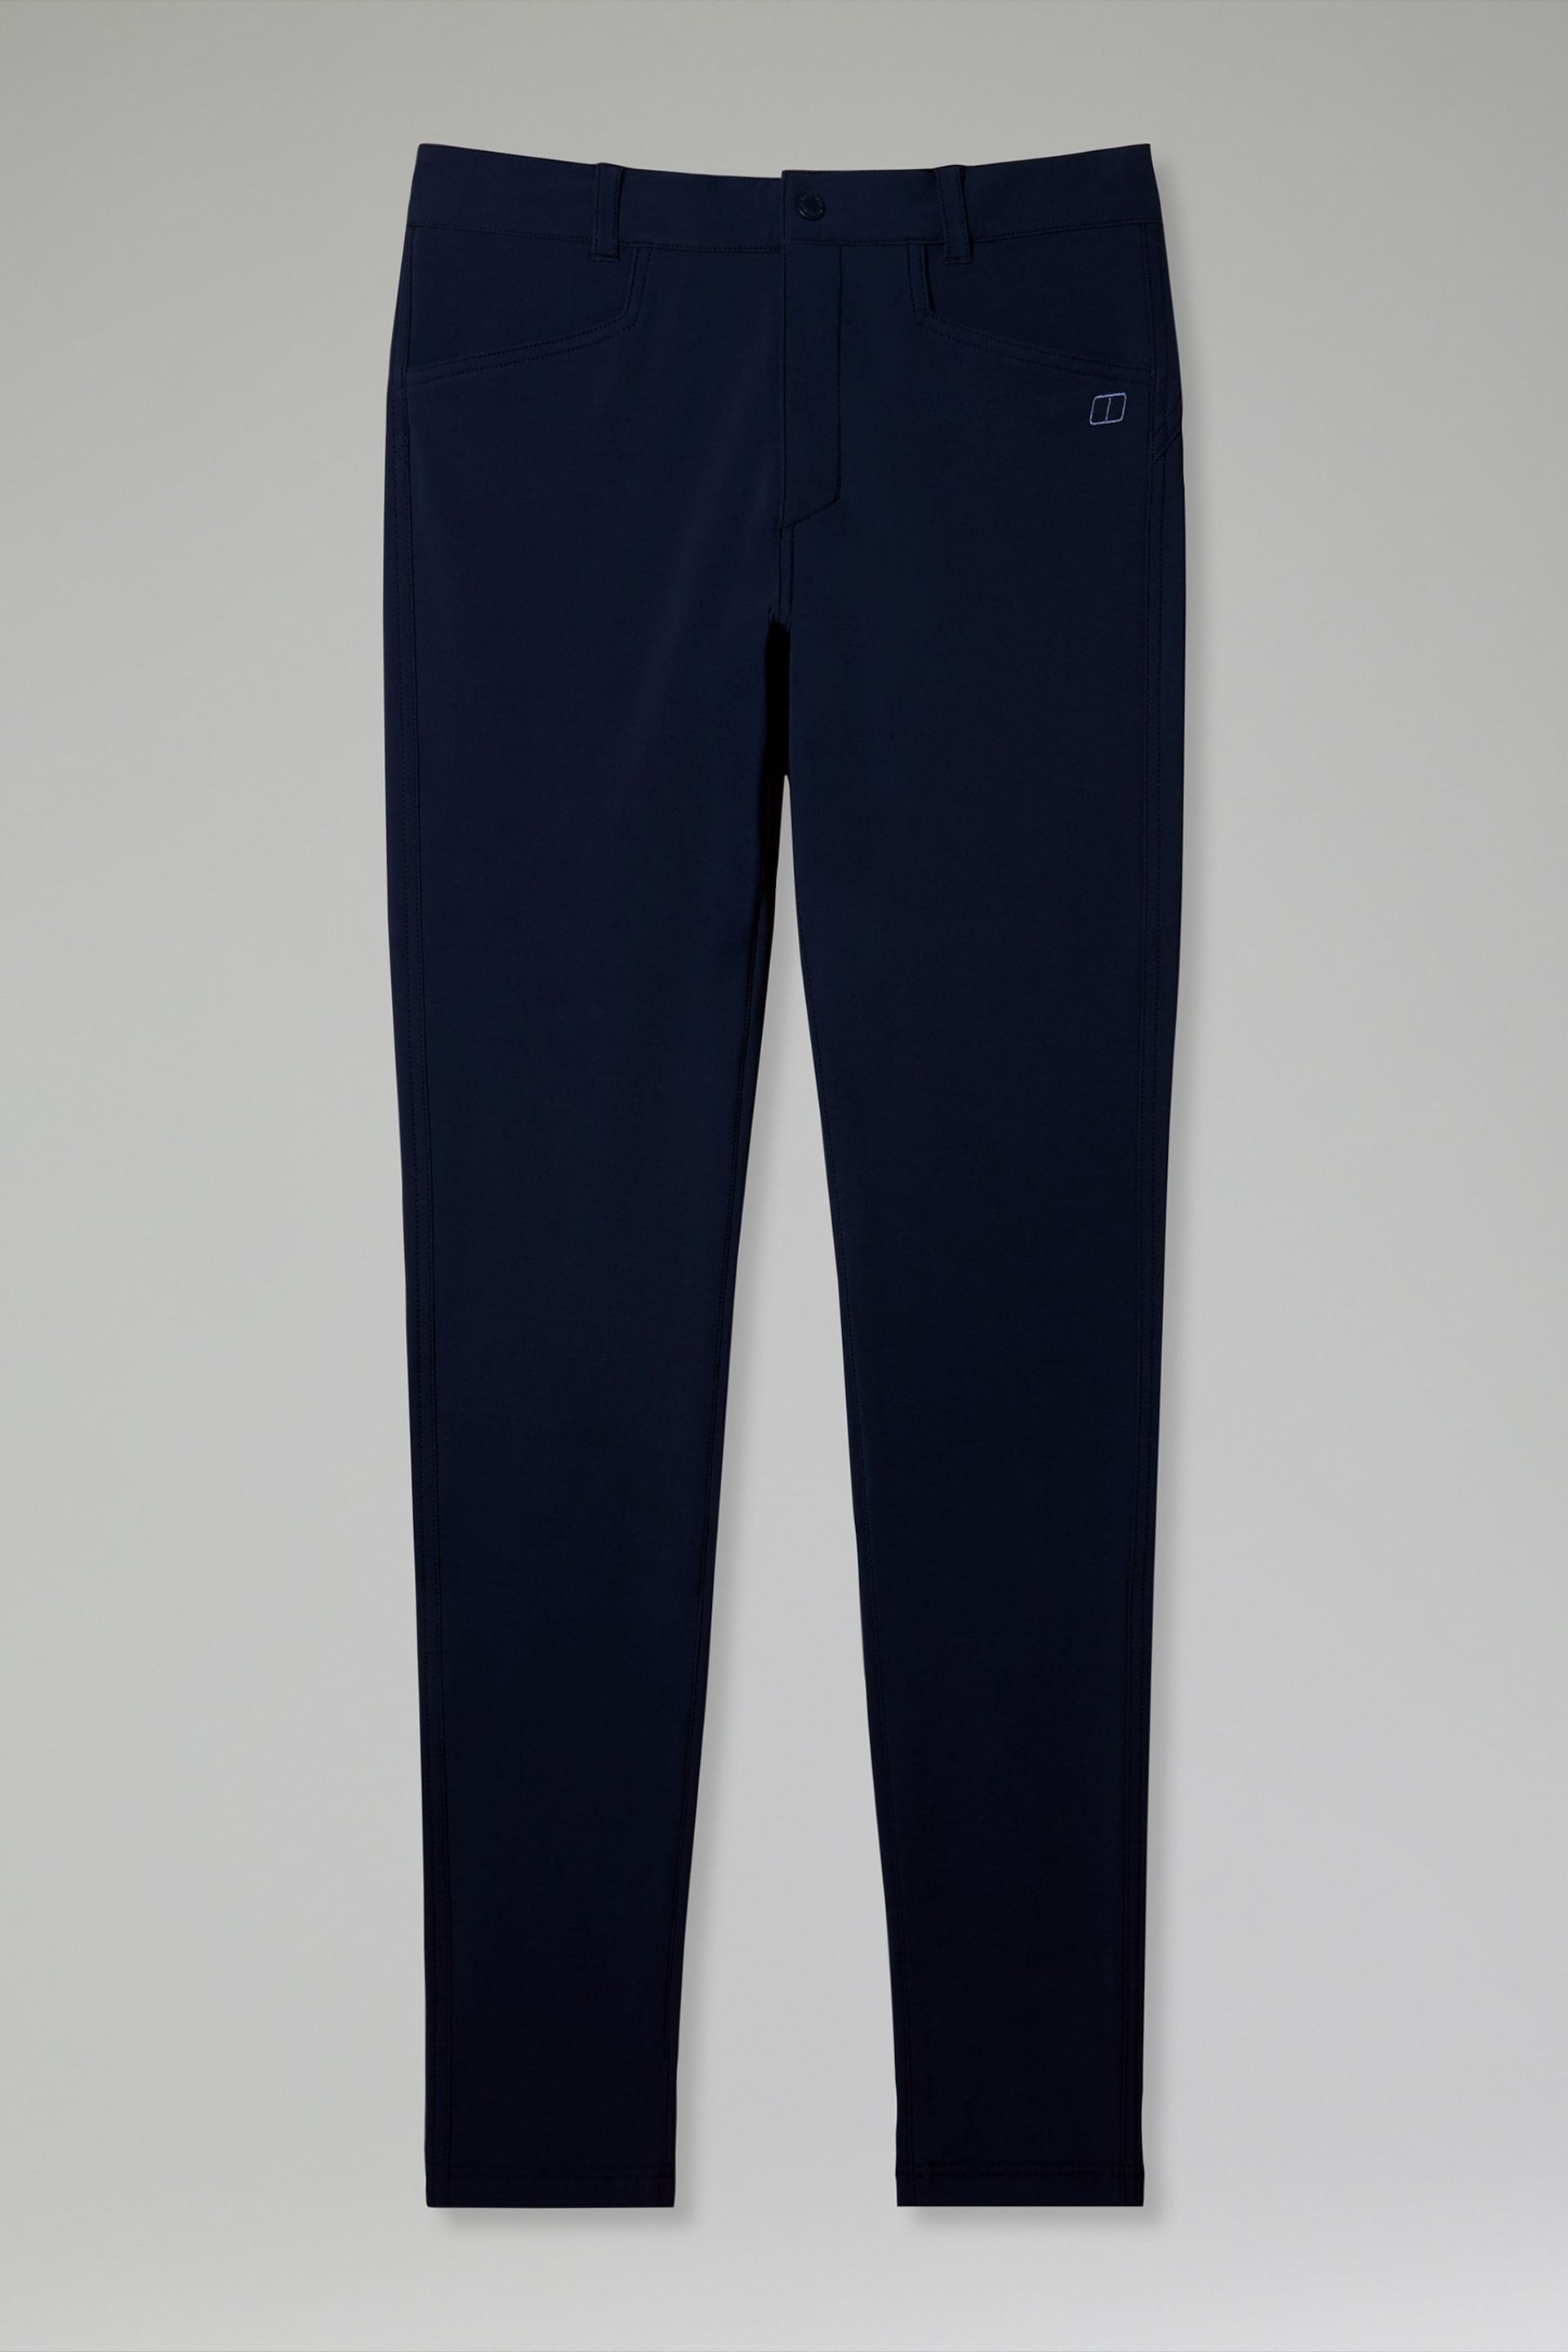 Berghaus Everyday Skinny Stretch Trousers - Image 6 of 7